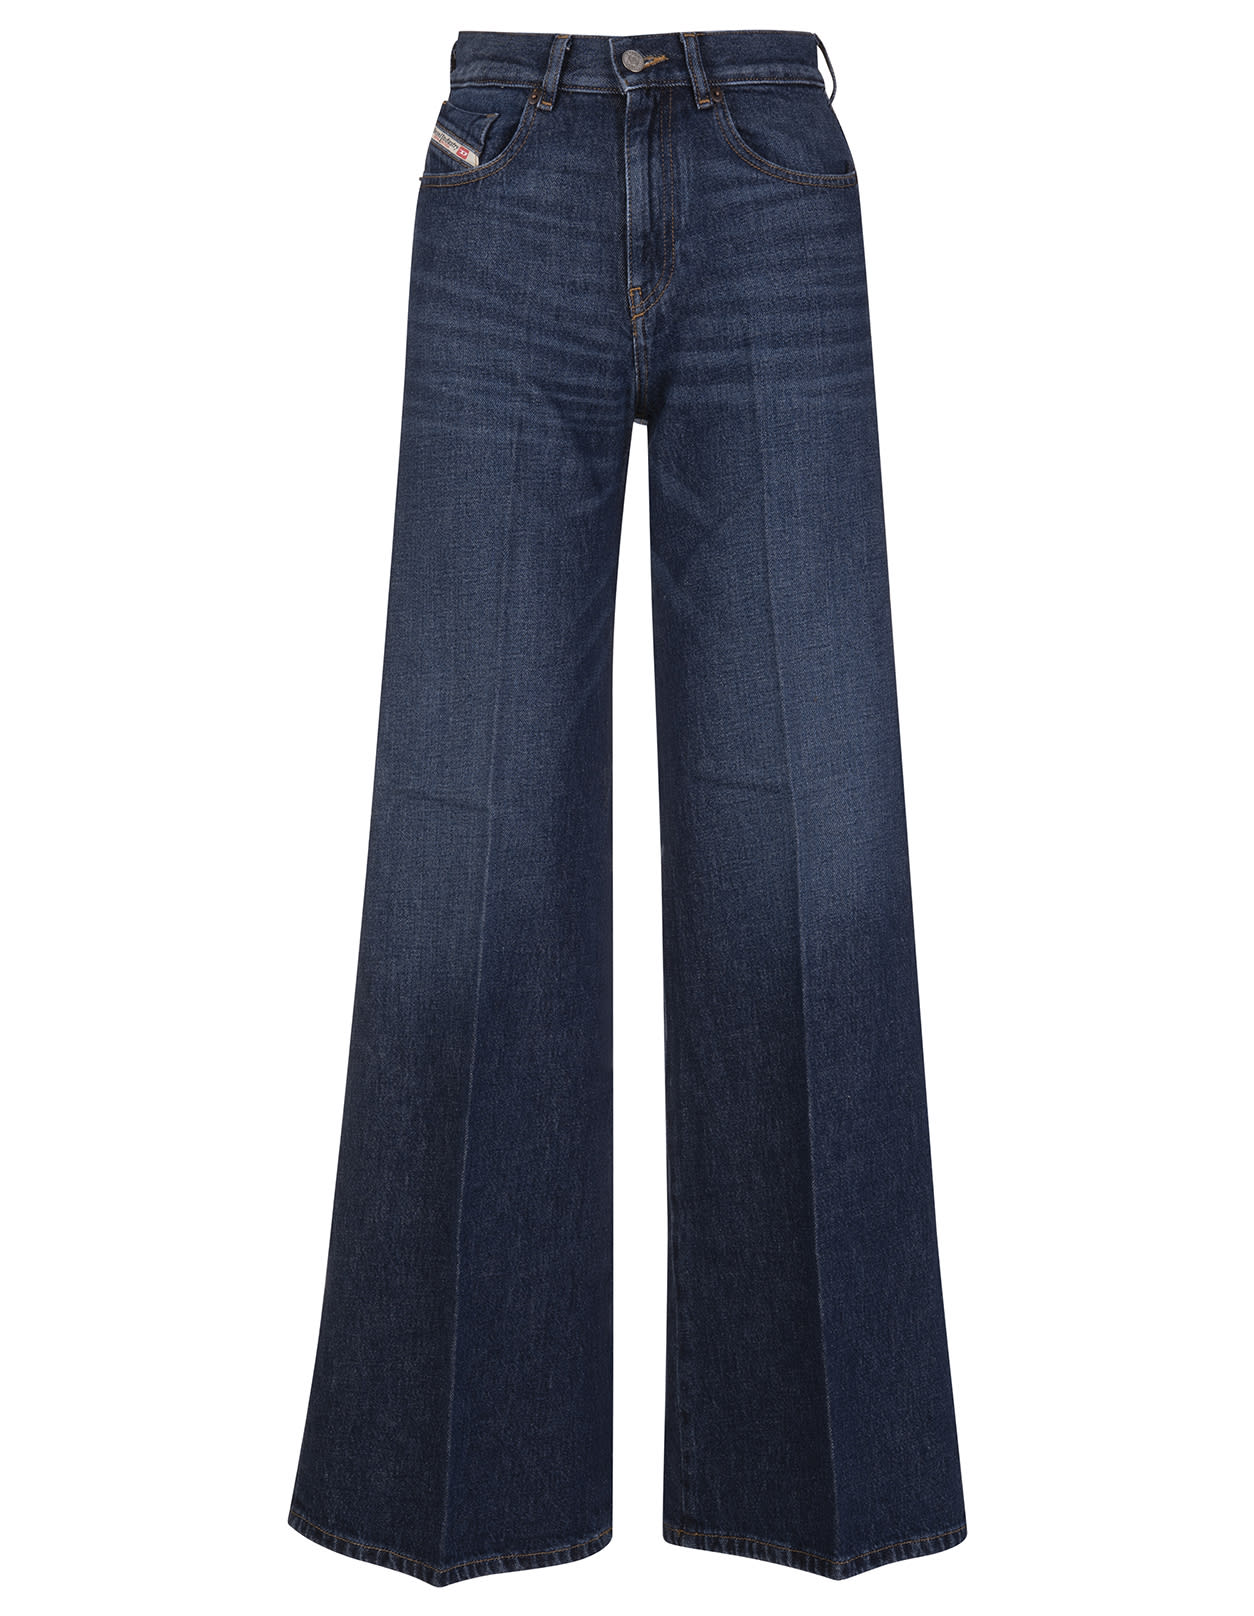 Diesel Woman - Dark Blue 1978 09c03 Bootcut And Flare Jeans